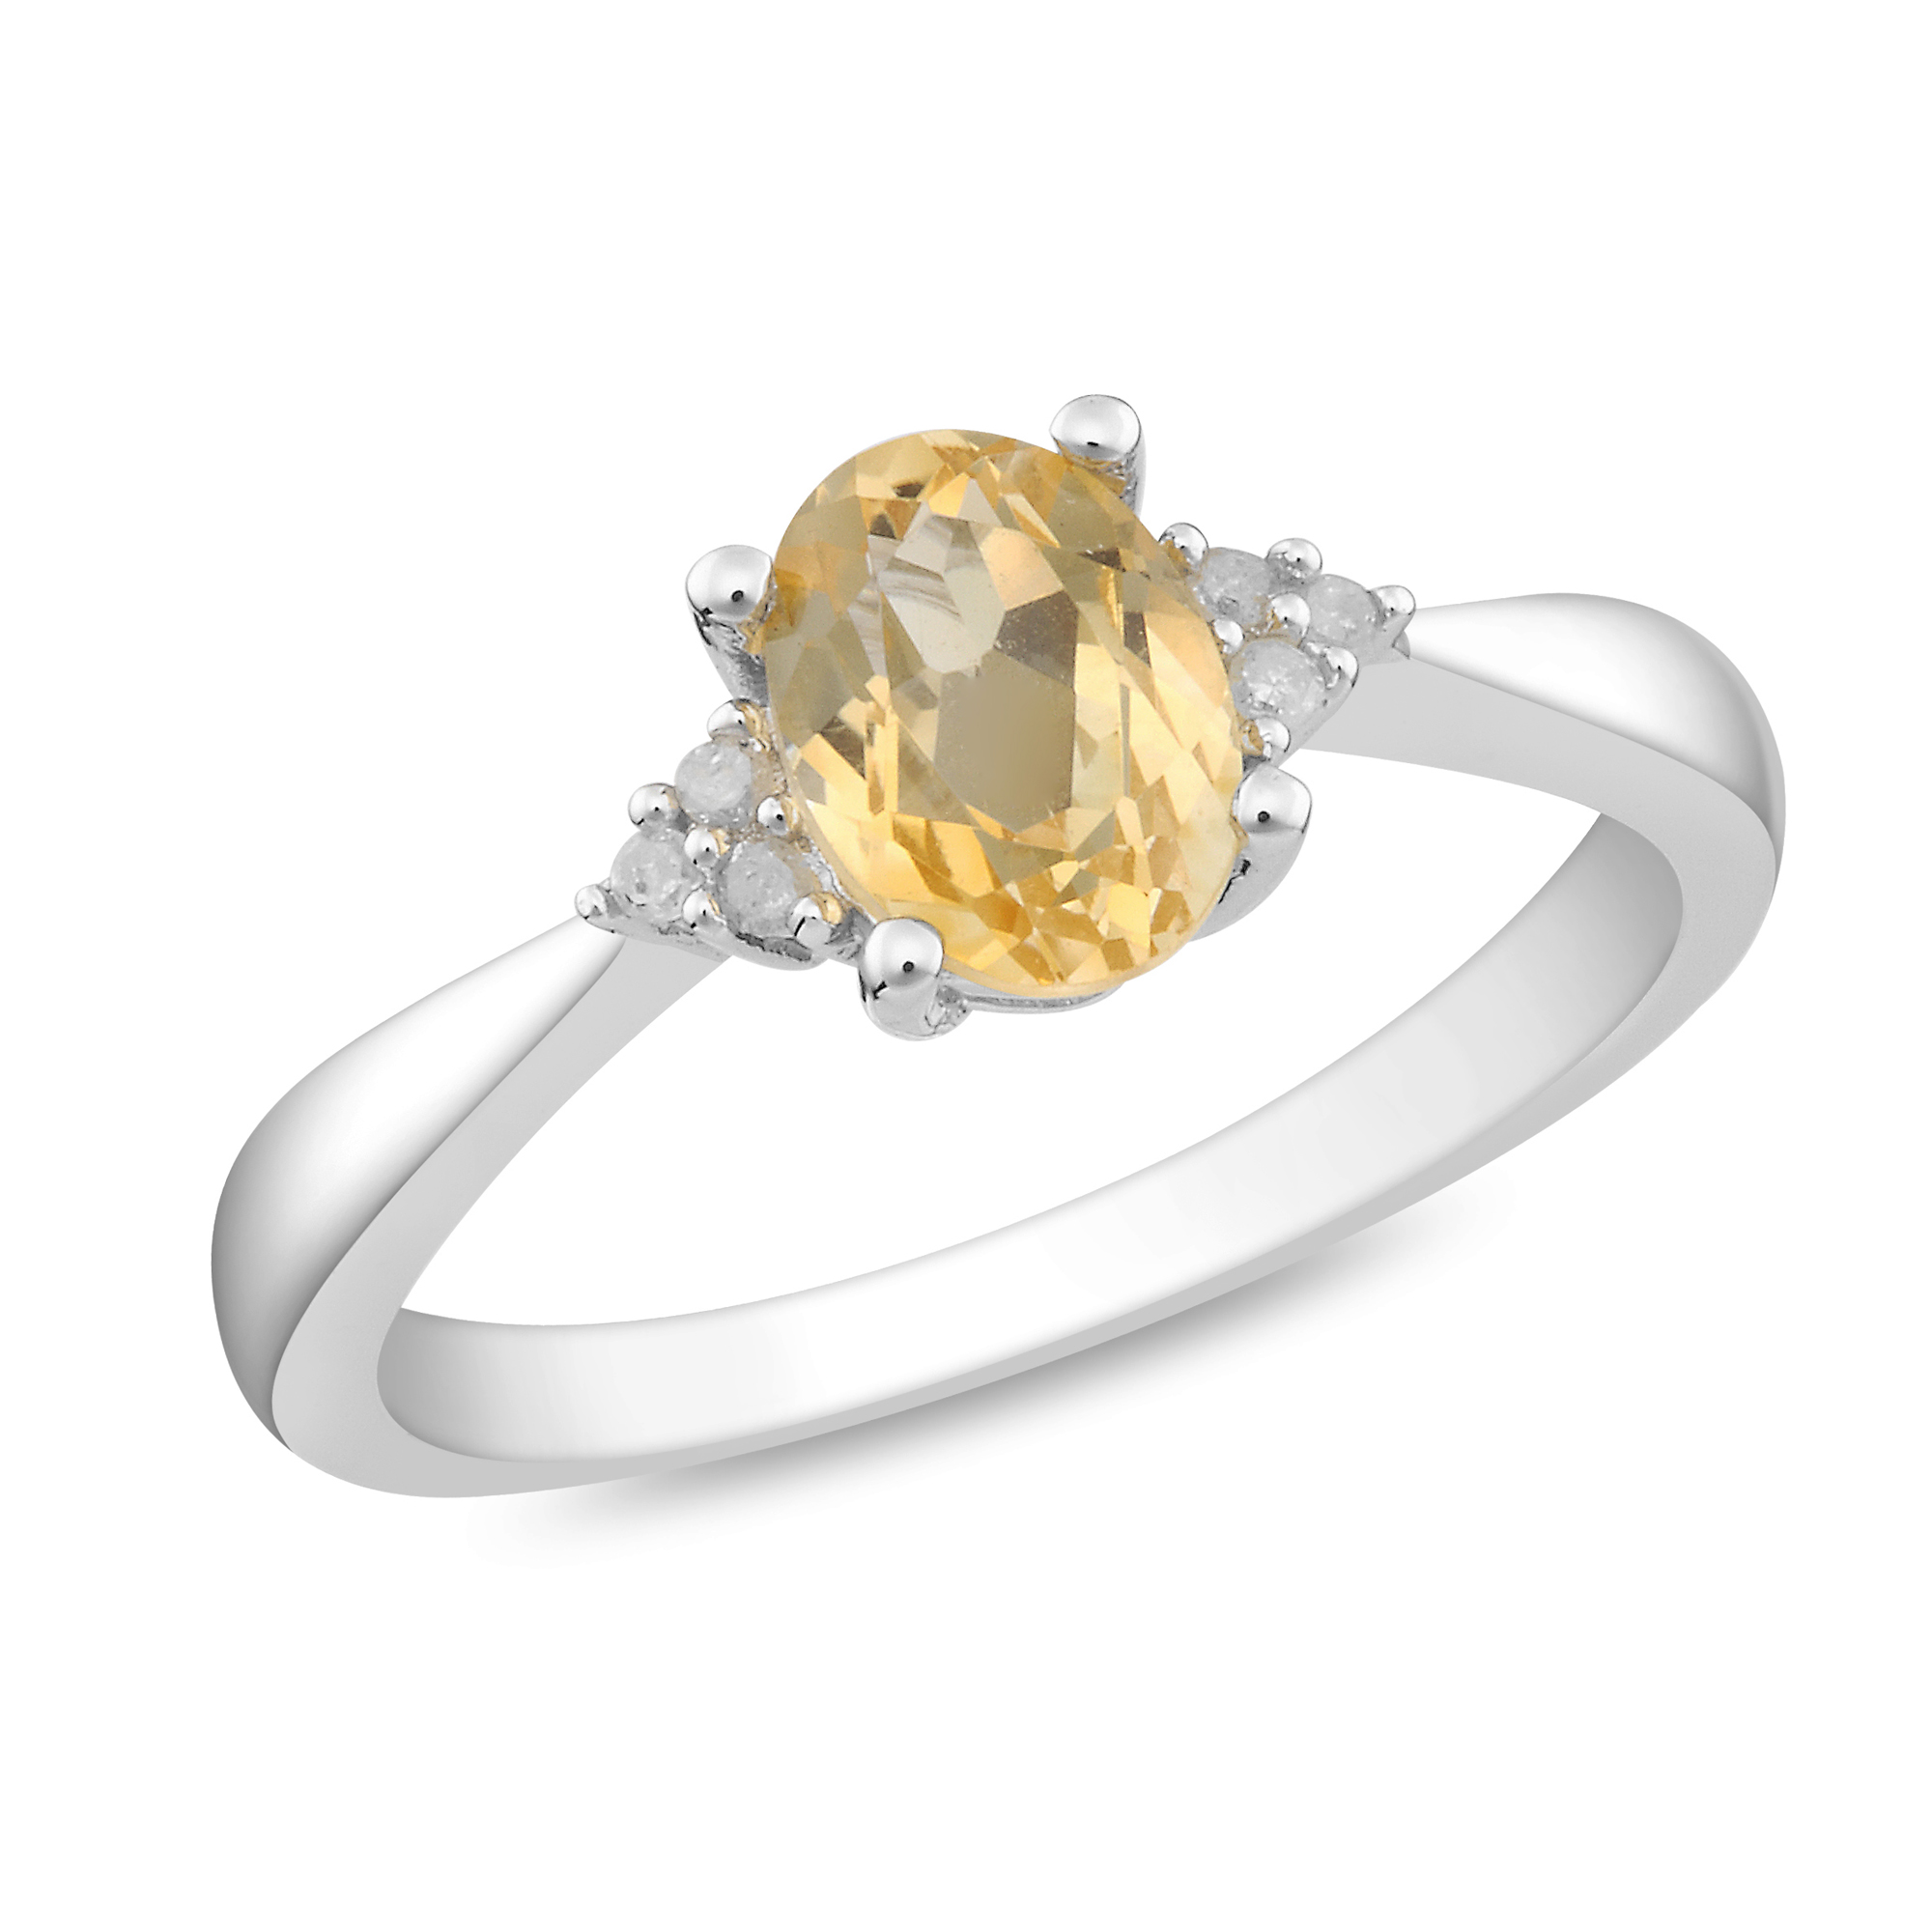 Amour 0.03 Carat T.W. Diamond and 3/4 Carat T.G.W. Citrine Fashion Ring in Sterling Silver I3